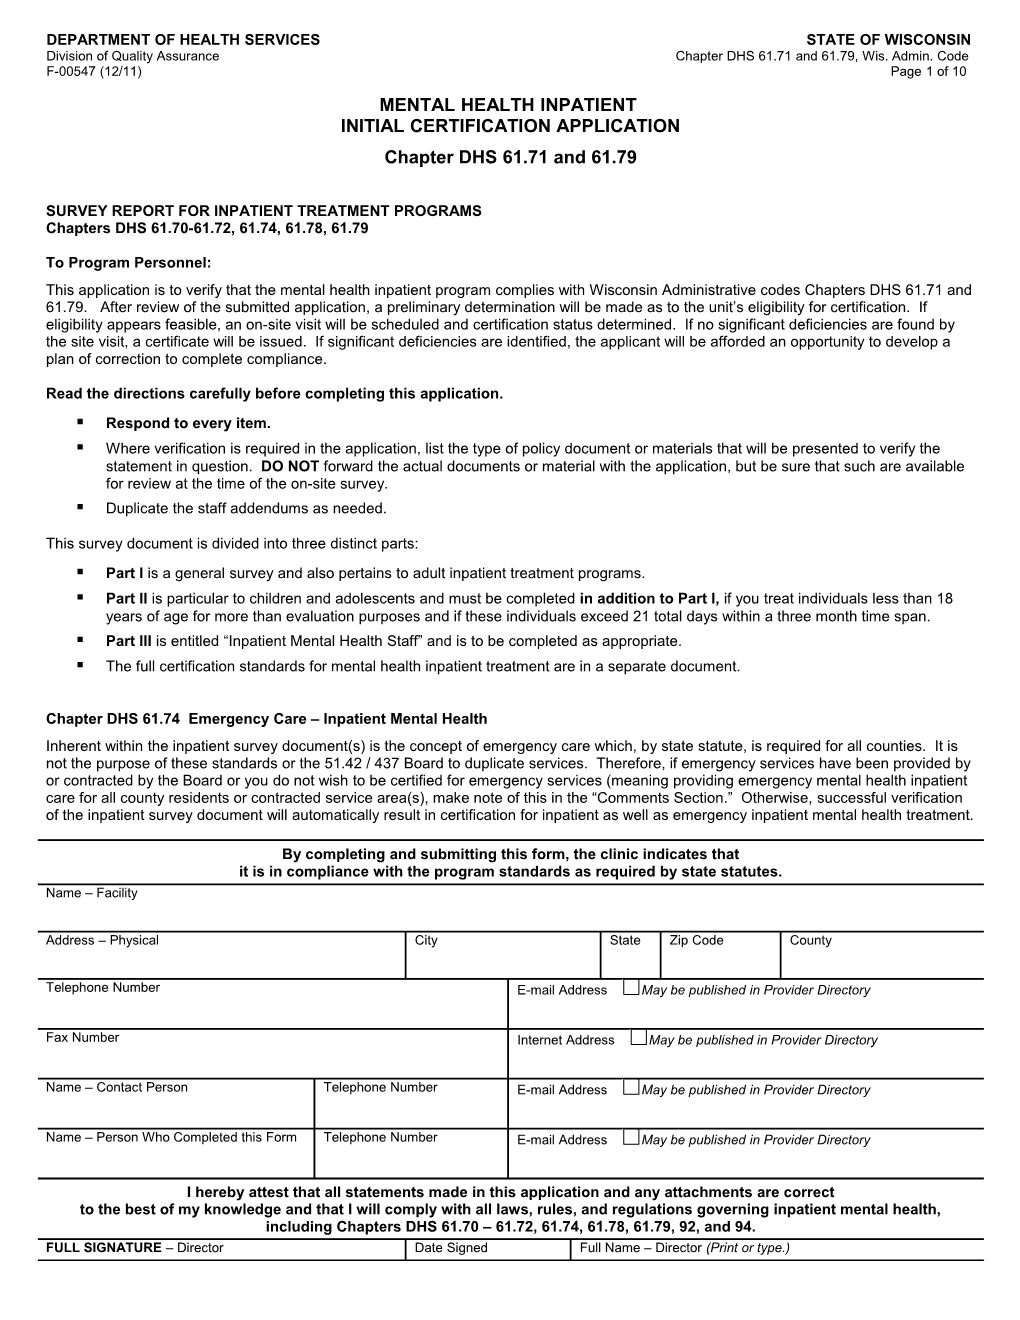 Mental Health Inpatient Initial Certification Application-DHS 61.71 & 61.79, F-00547